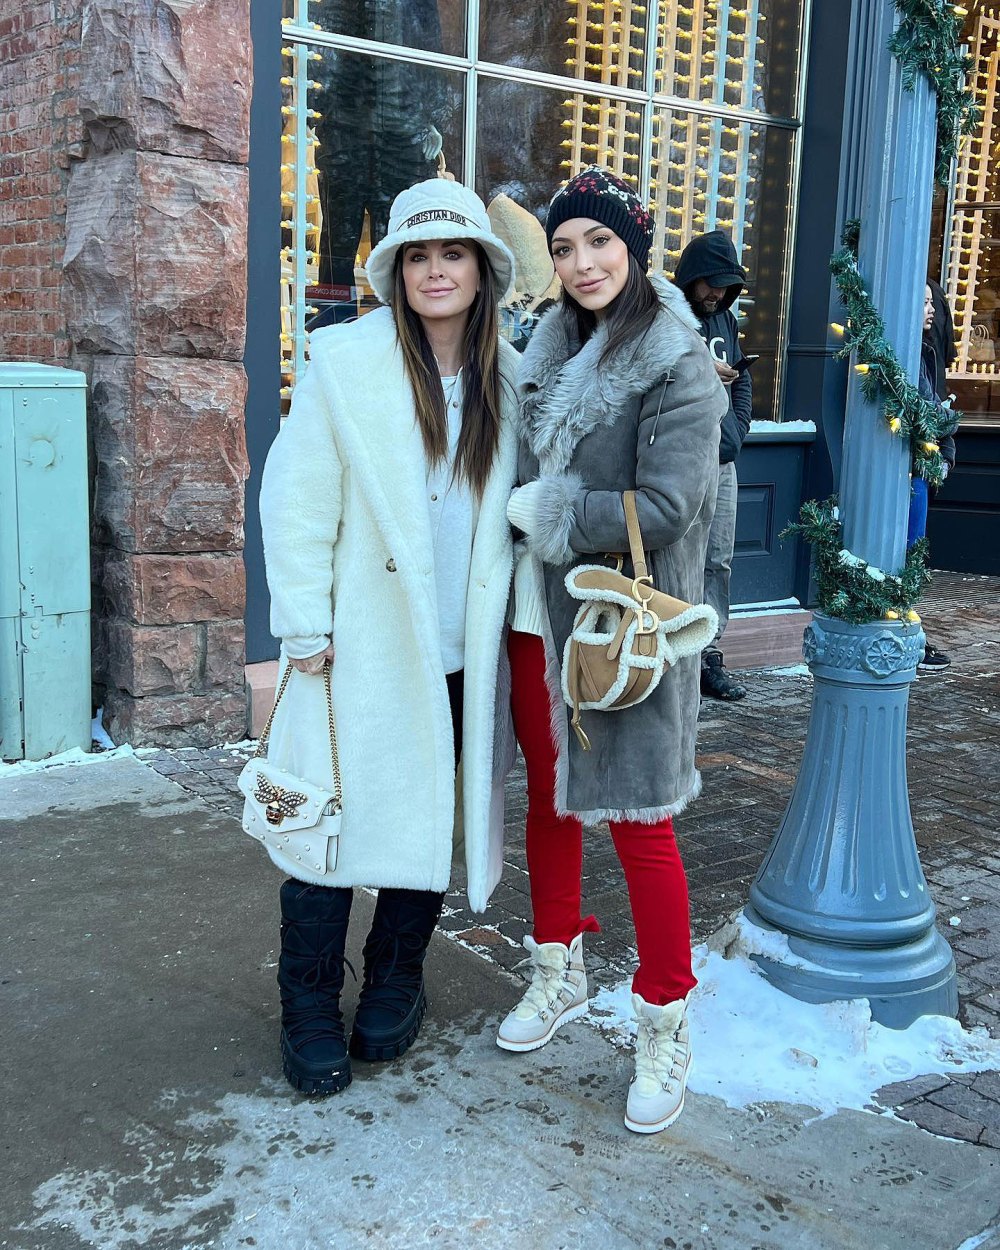 Kyle Richards Dodges Question About Whether Daughter Farrah Aldjufrie Is Still Engaged to Alex Manos